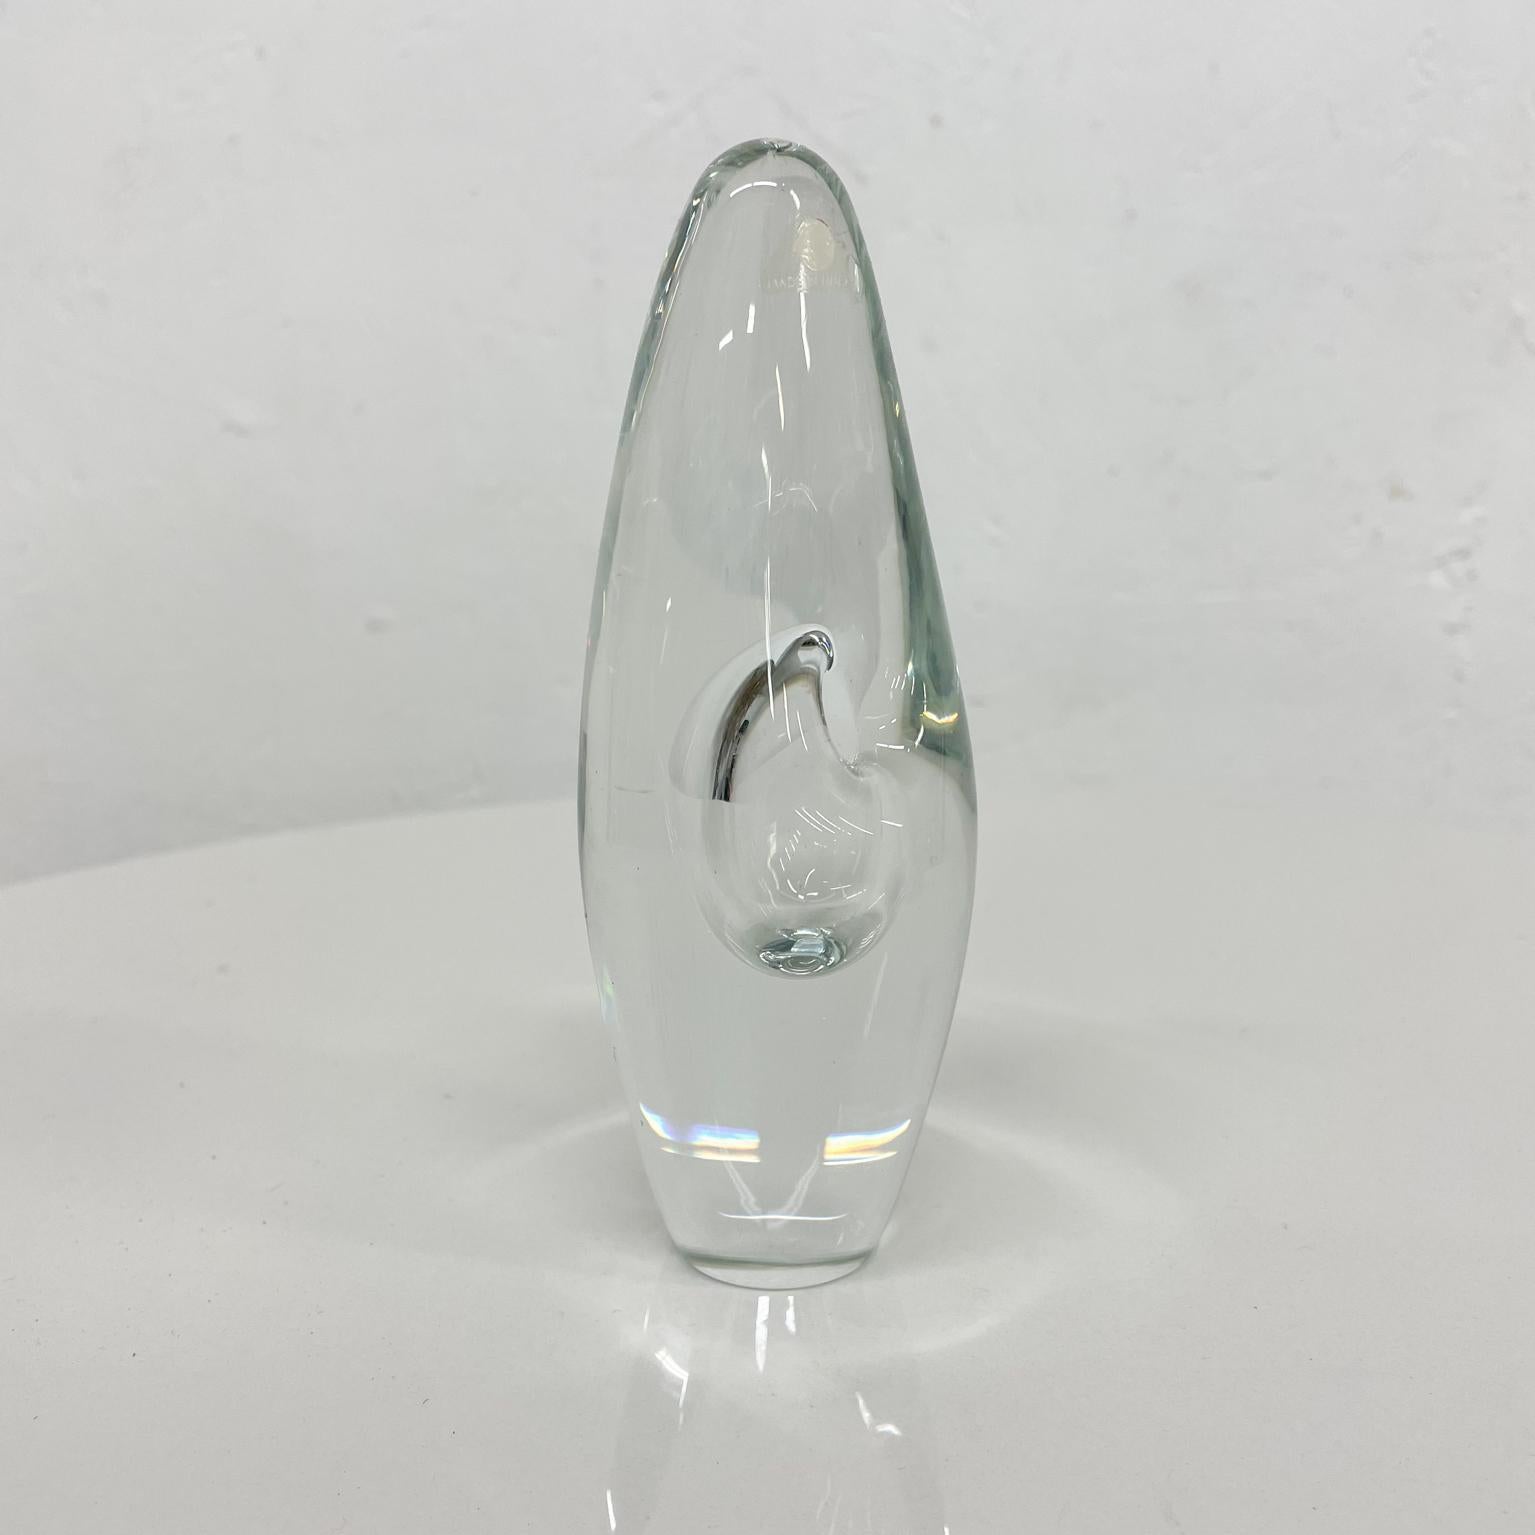 1957 Glass Vase Orchidée by Timo Sarpaneva for Iittala Finland For Sale 2